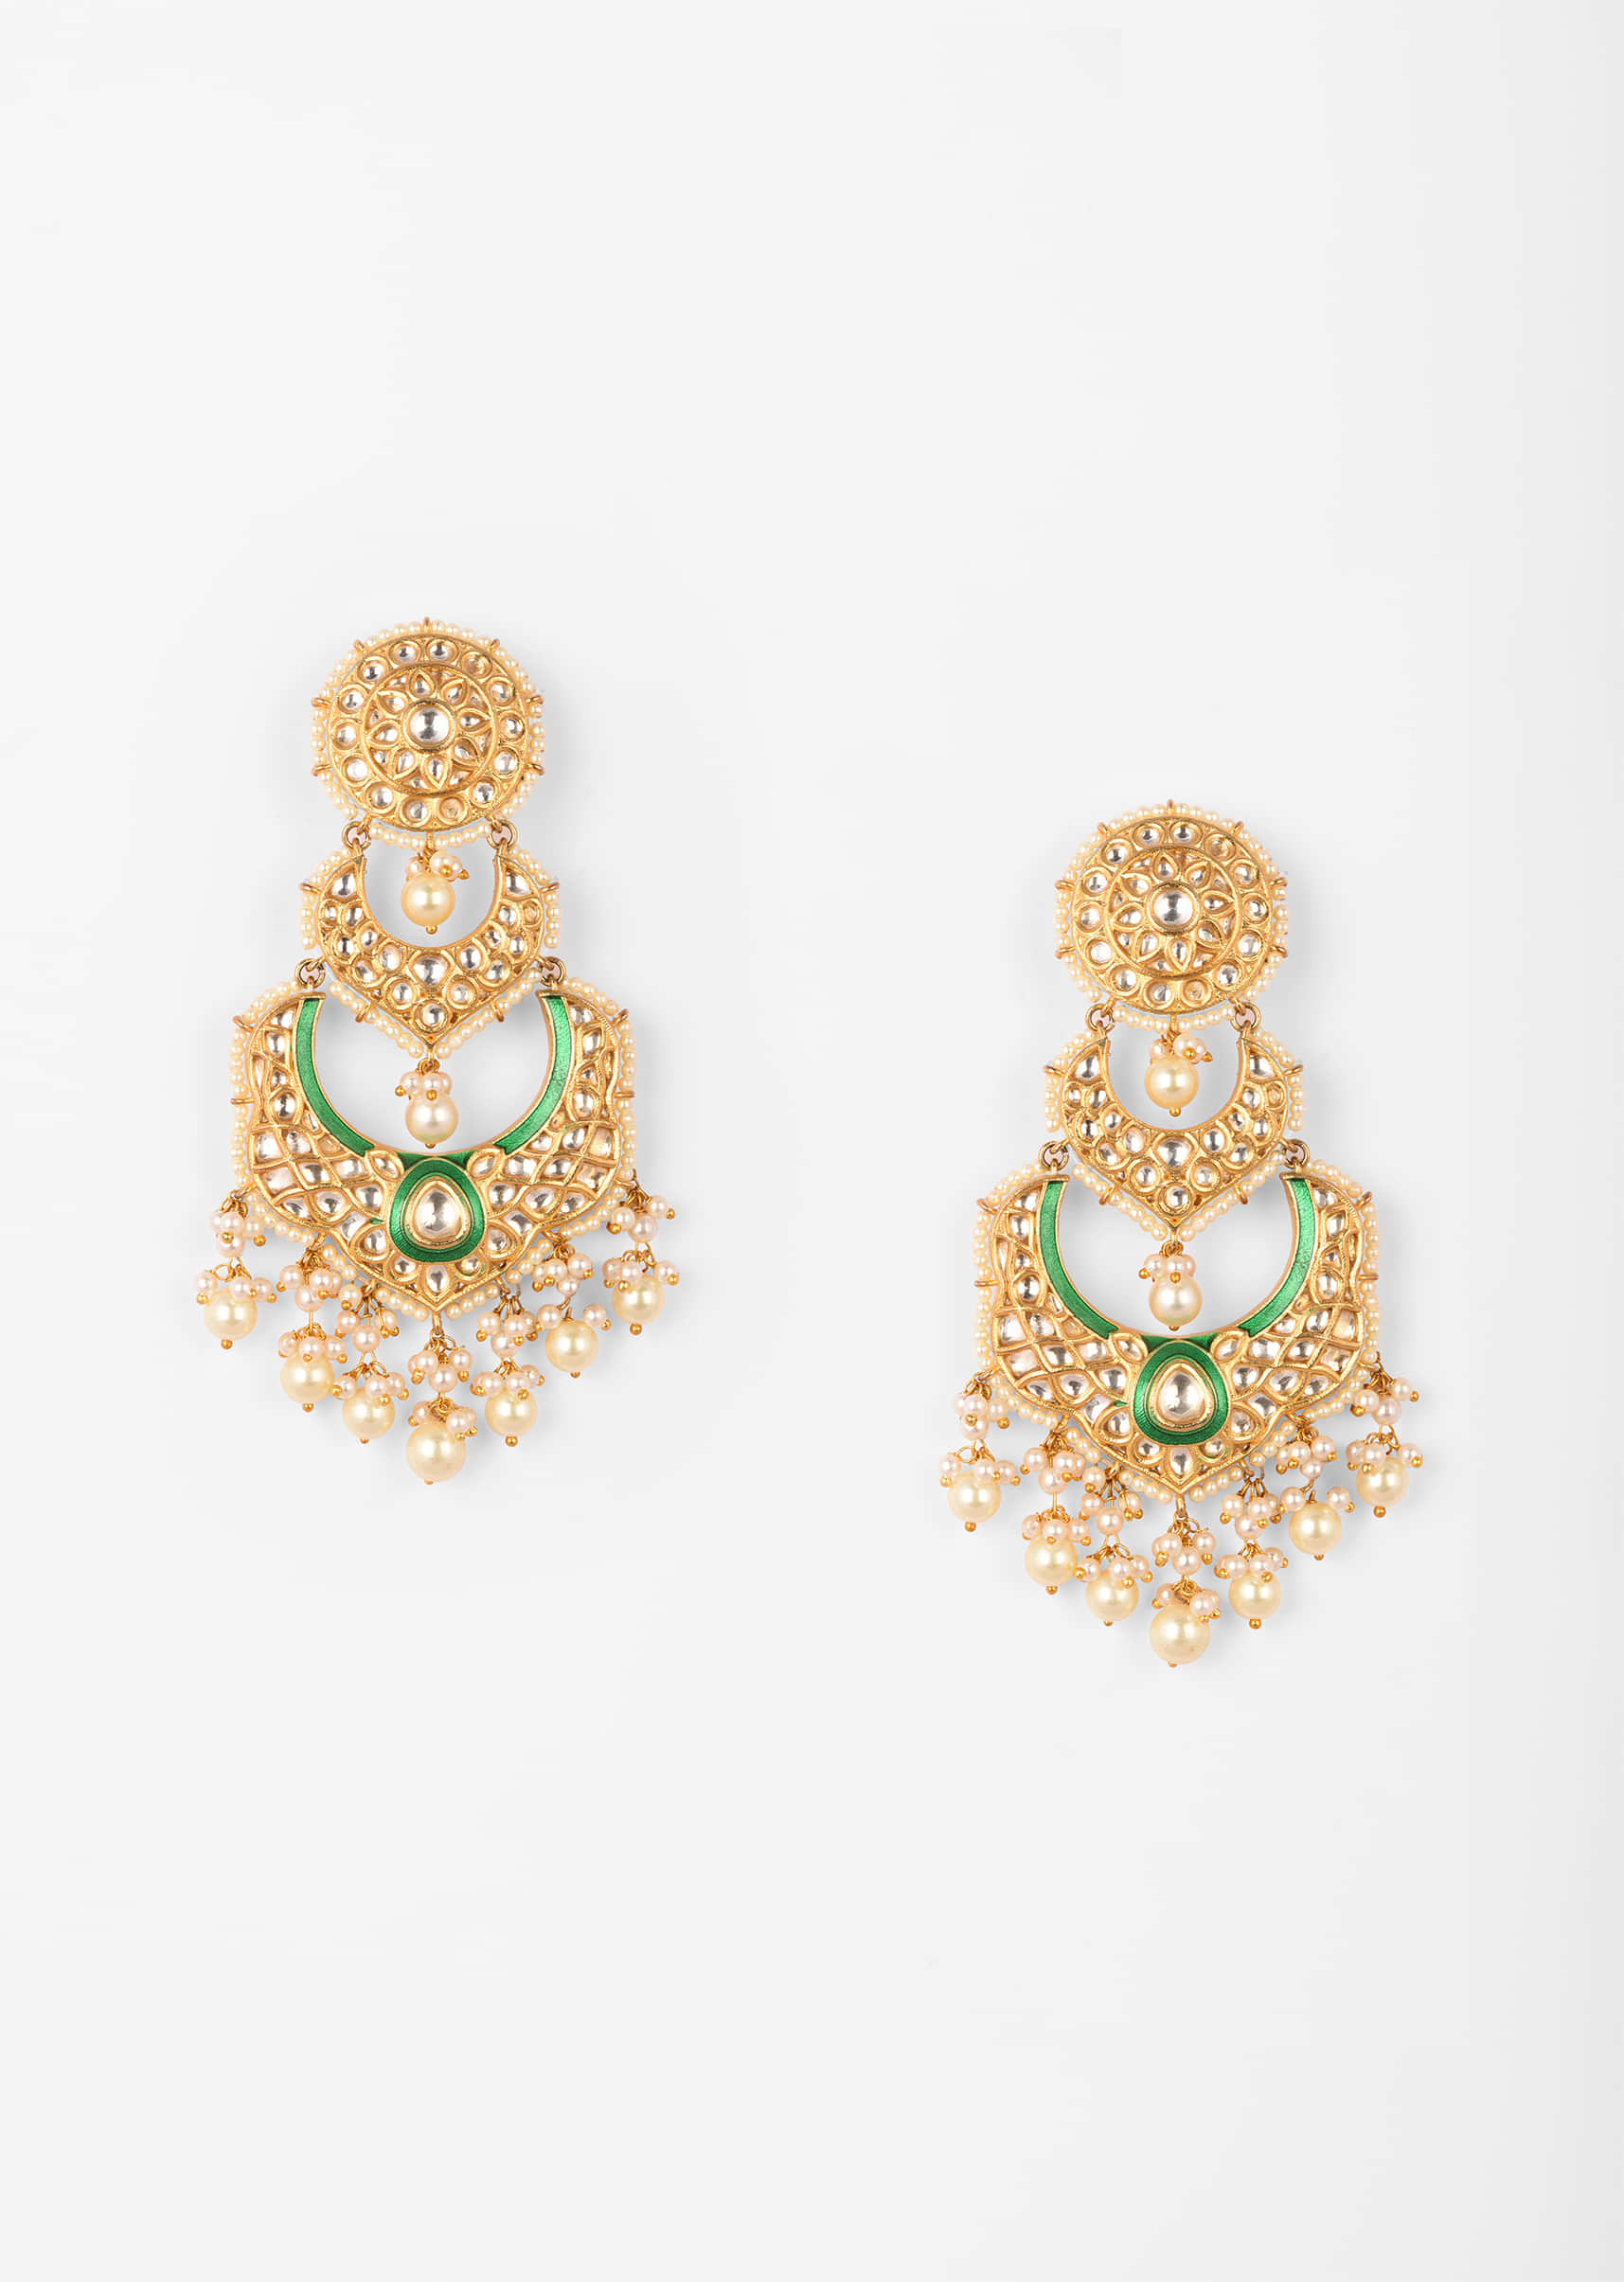 Gold Plated Chandelier Earrings With Kundan, Green Minakari And Pearl Fringes 